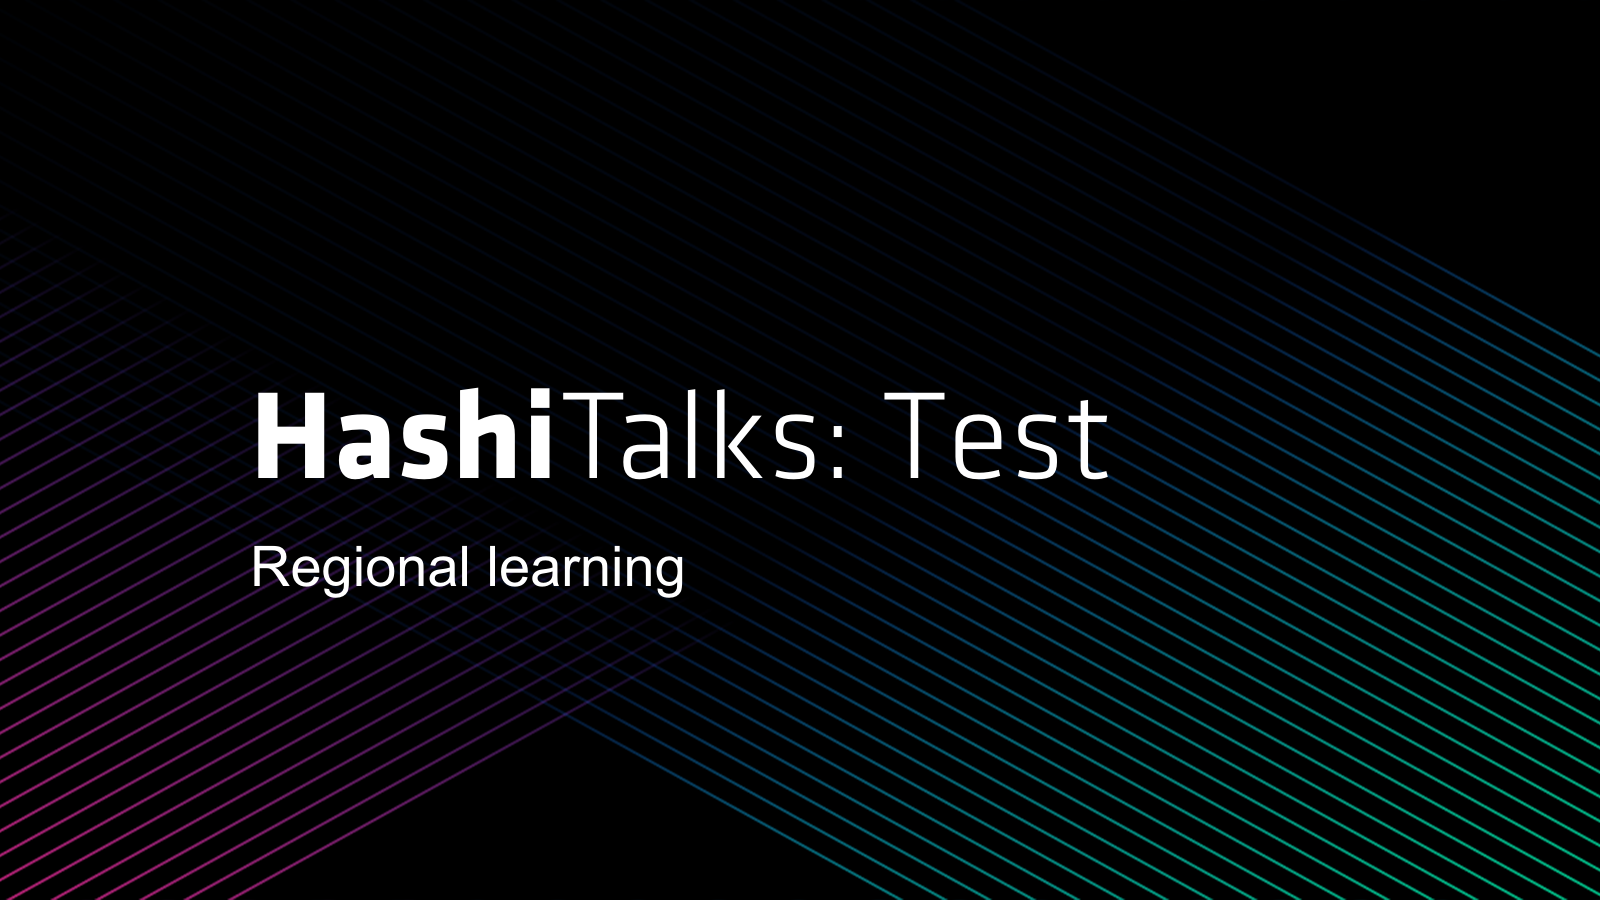 HashiTalks: Test and regional learning in white